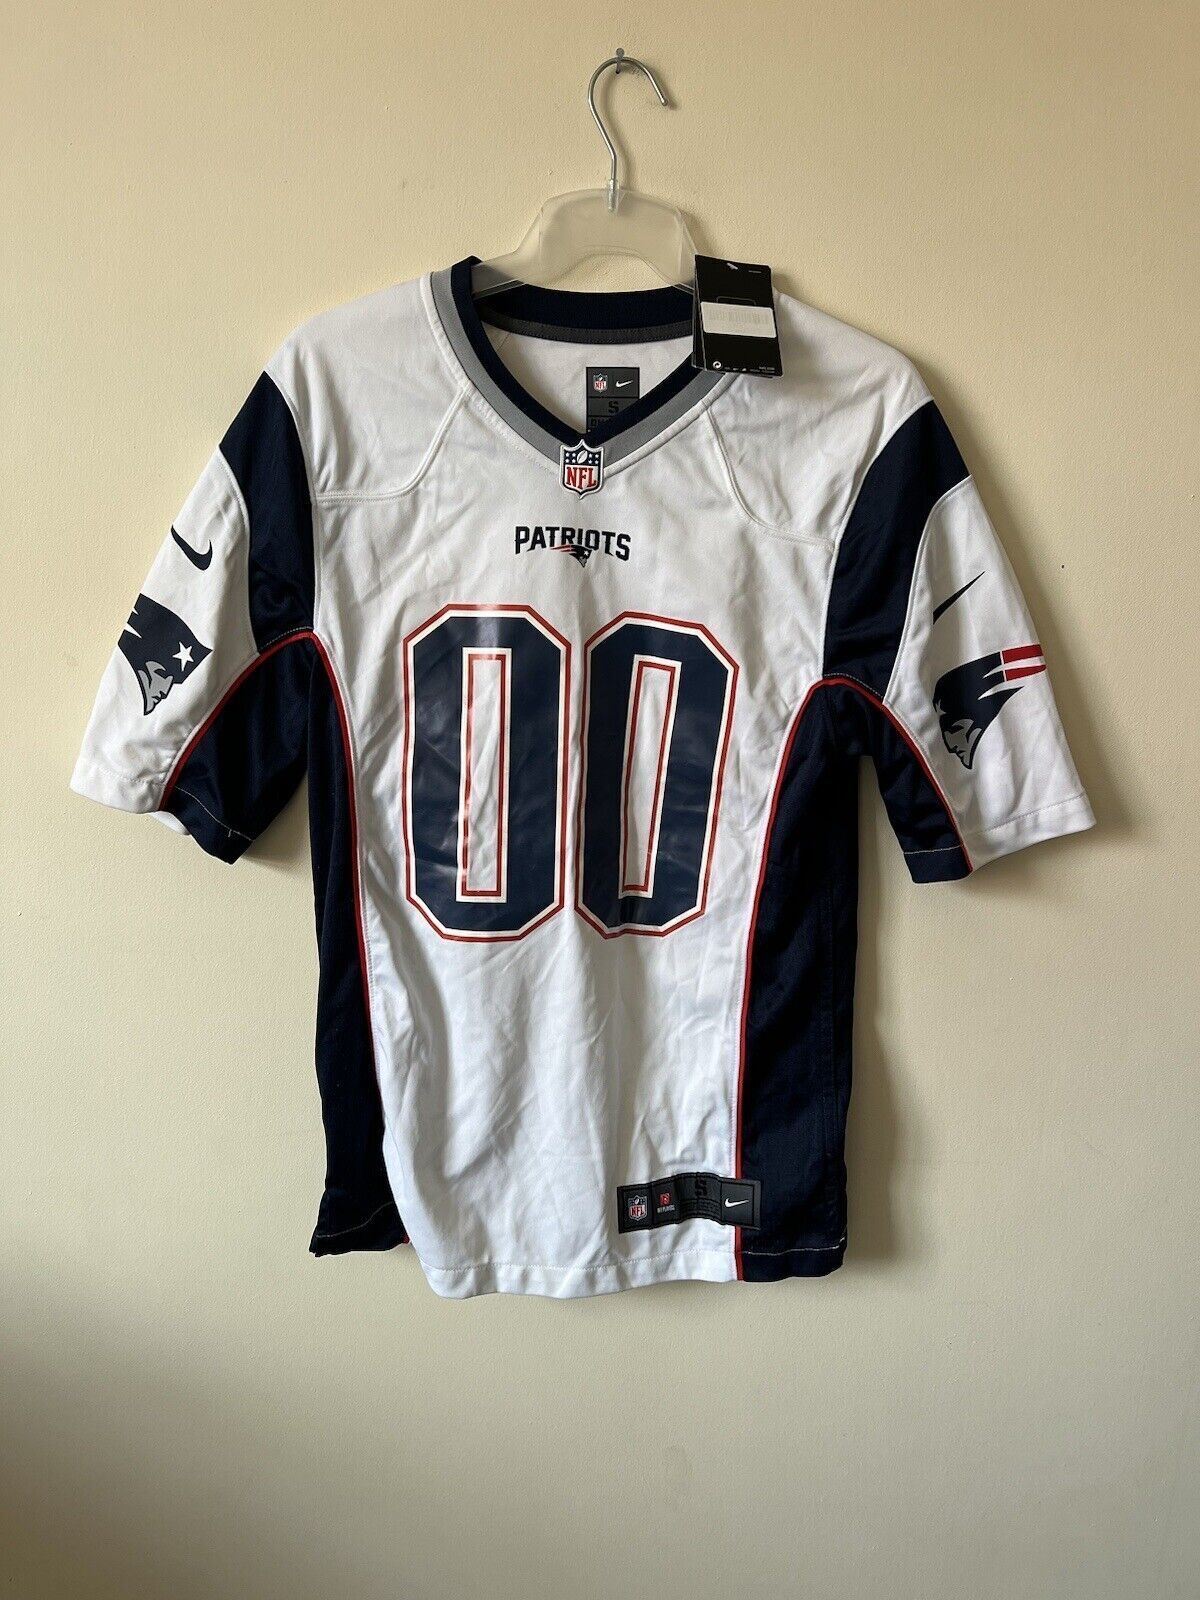 Nike NFL New England Patriots Jersey THUGLIFE Mens Size Small